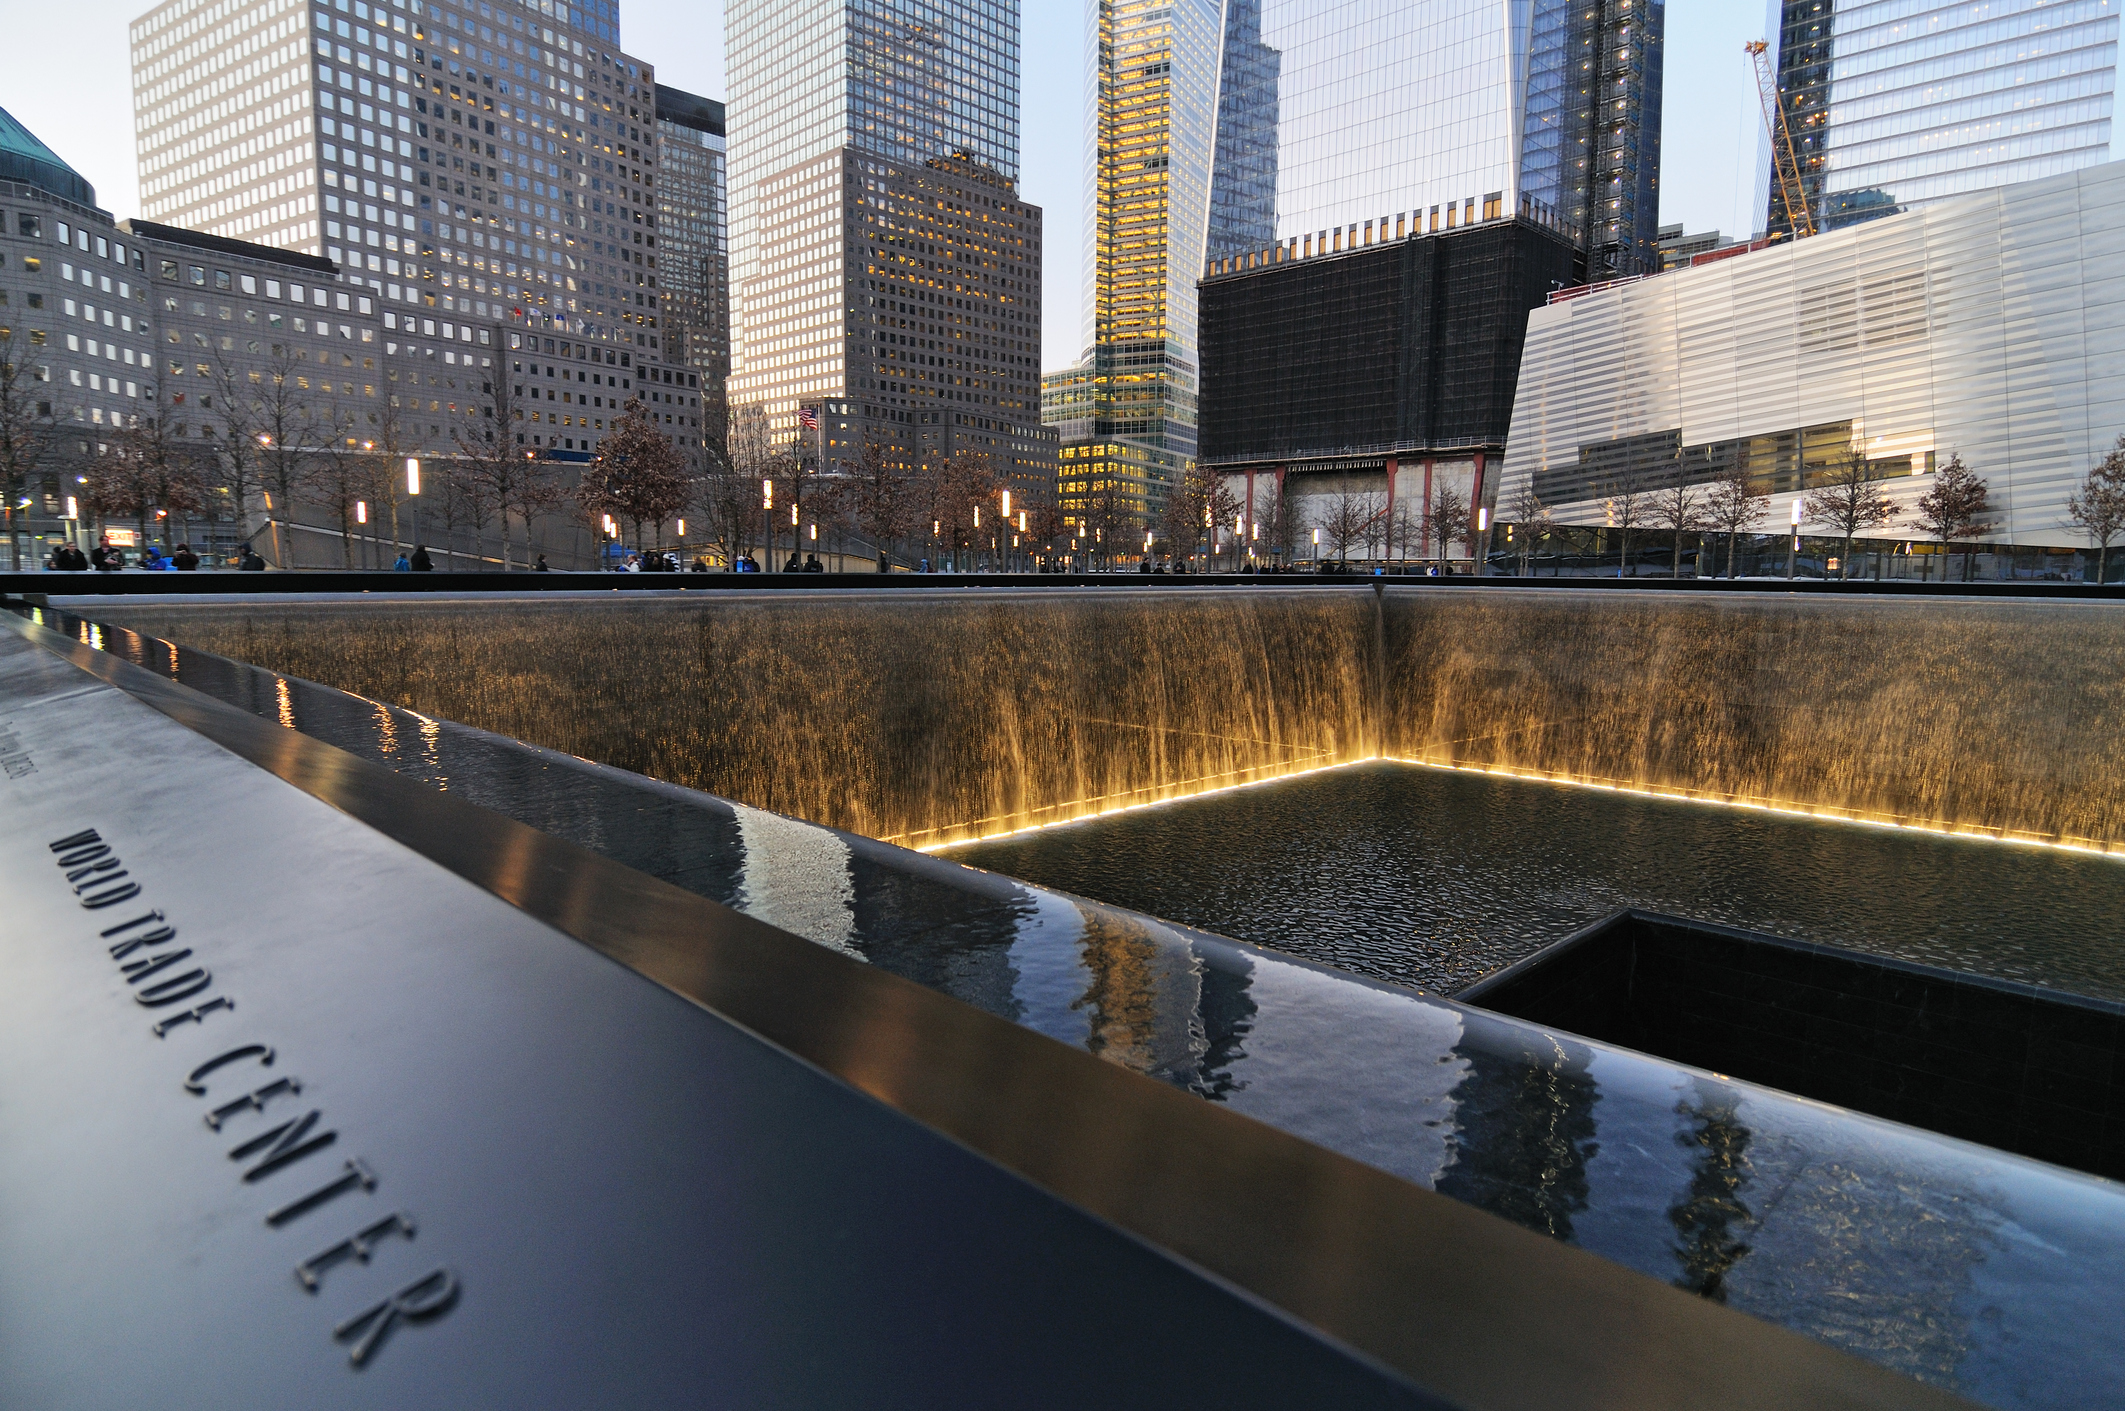 Reflecting on 9/11, Reevaluating US Foreign Policy